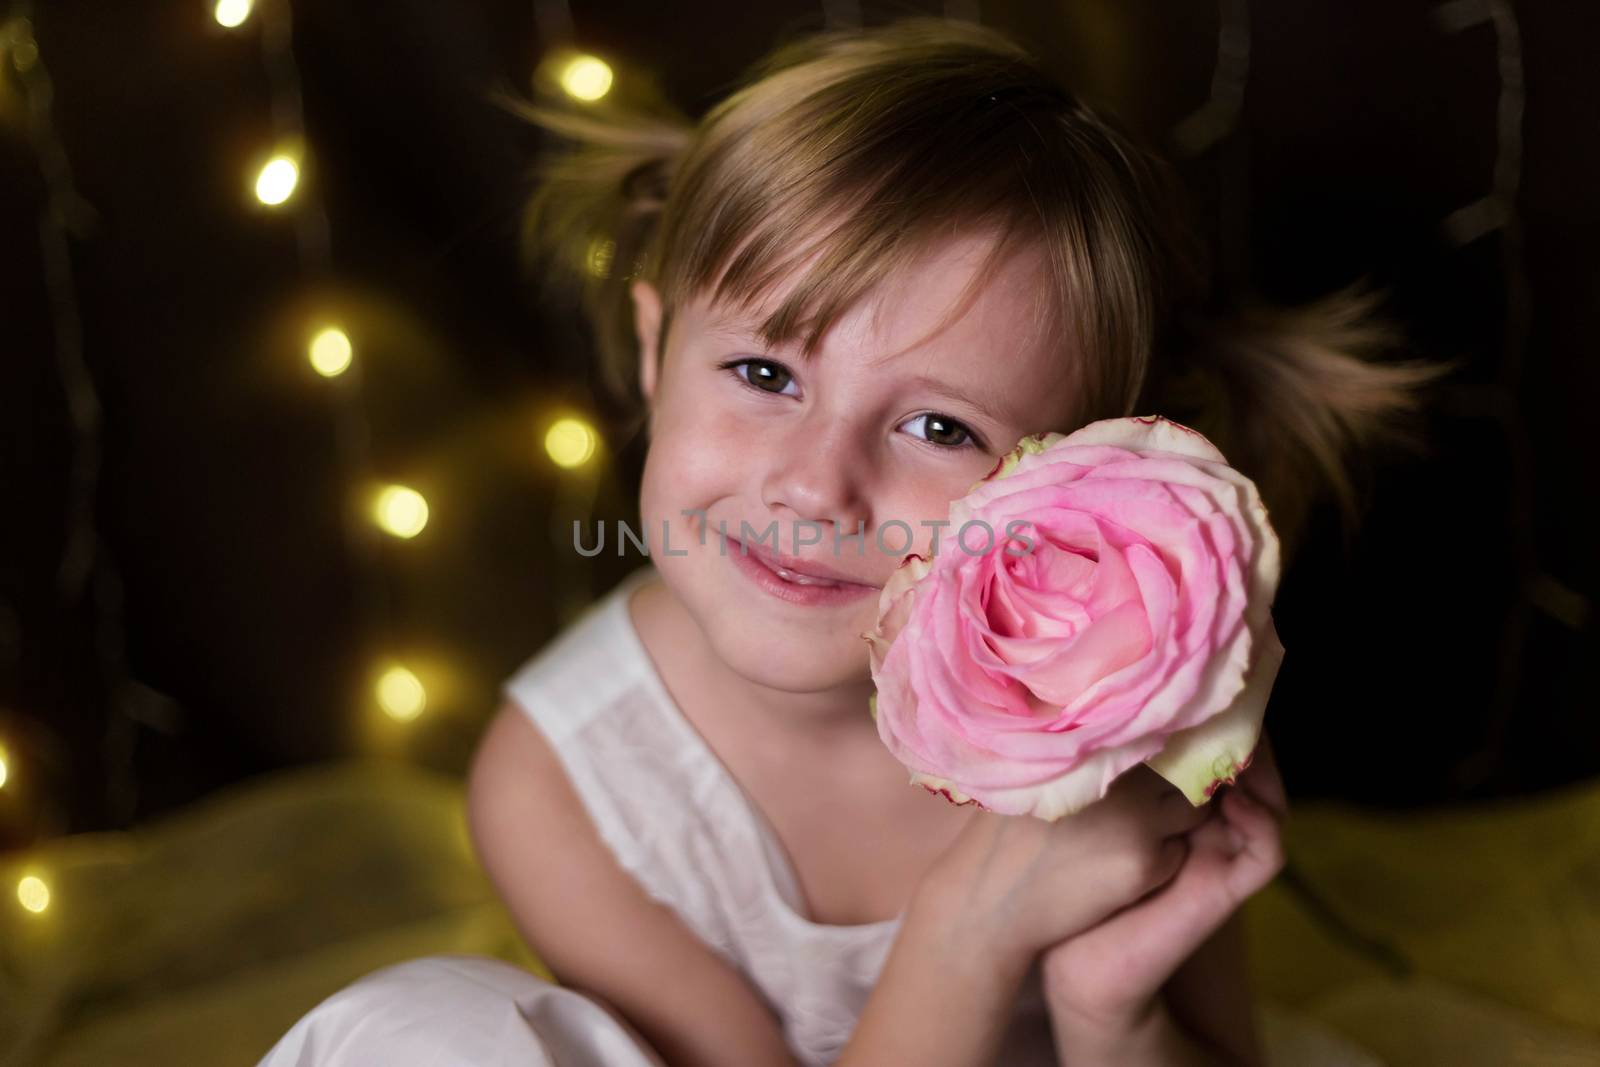 Young adorable pretty girl with rose from her father over dark background with garlands bokeh